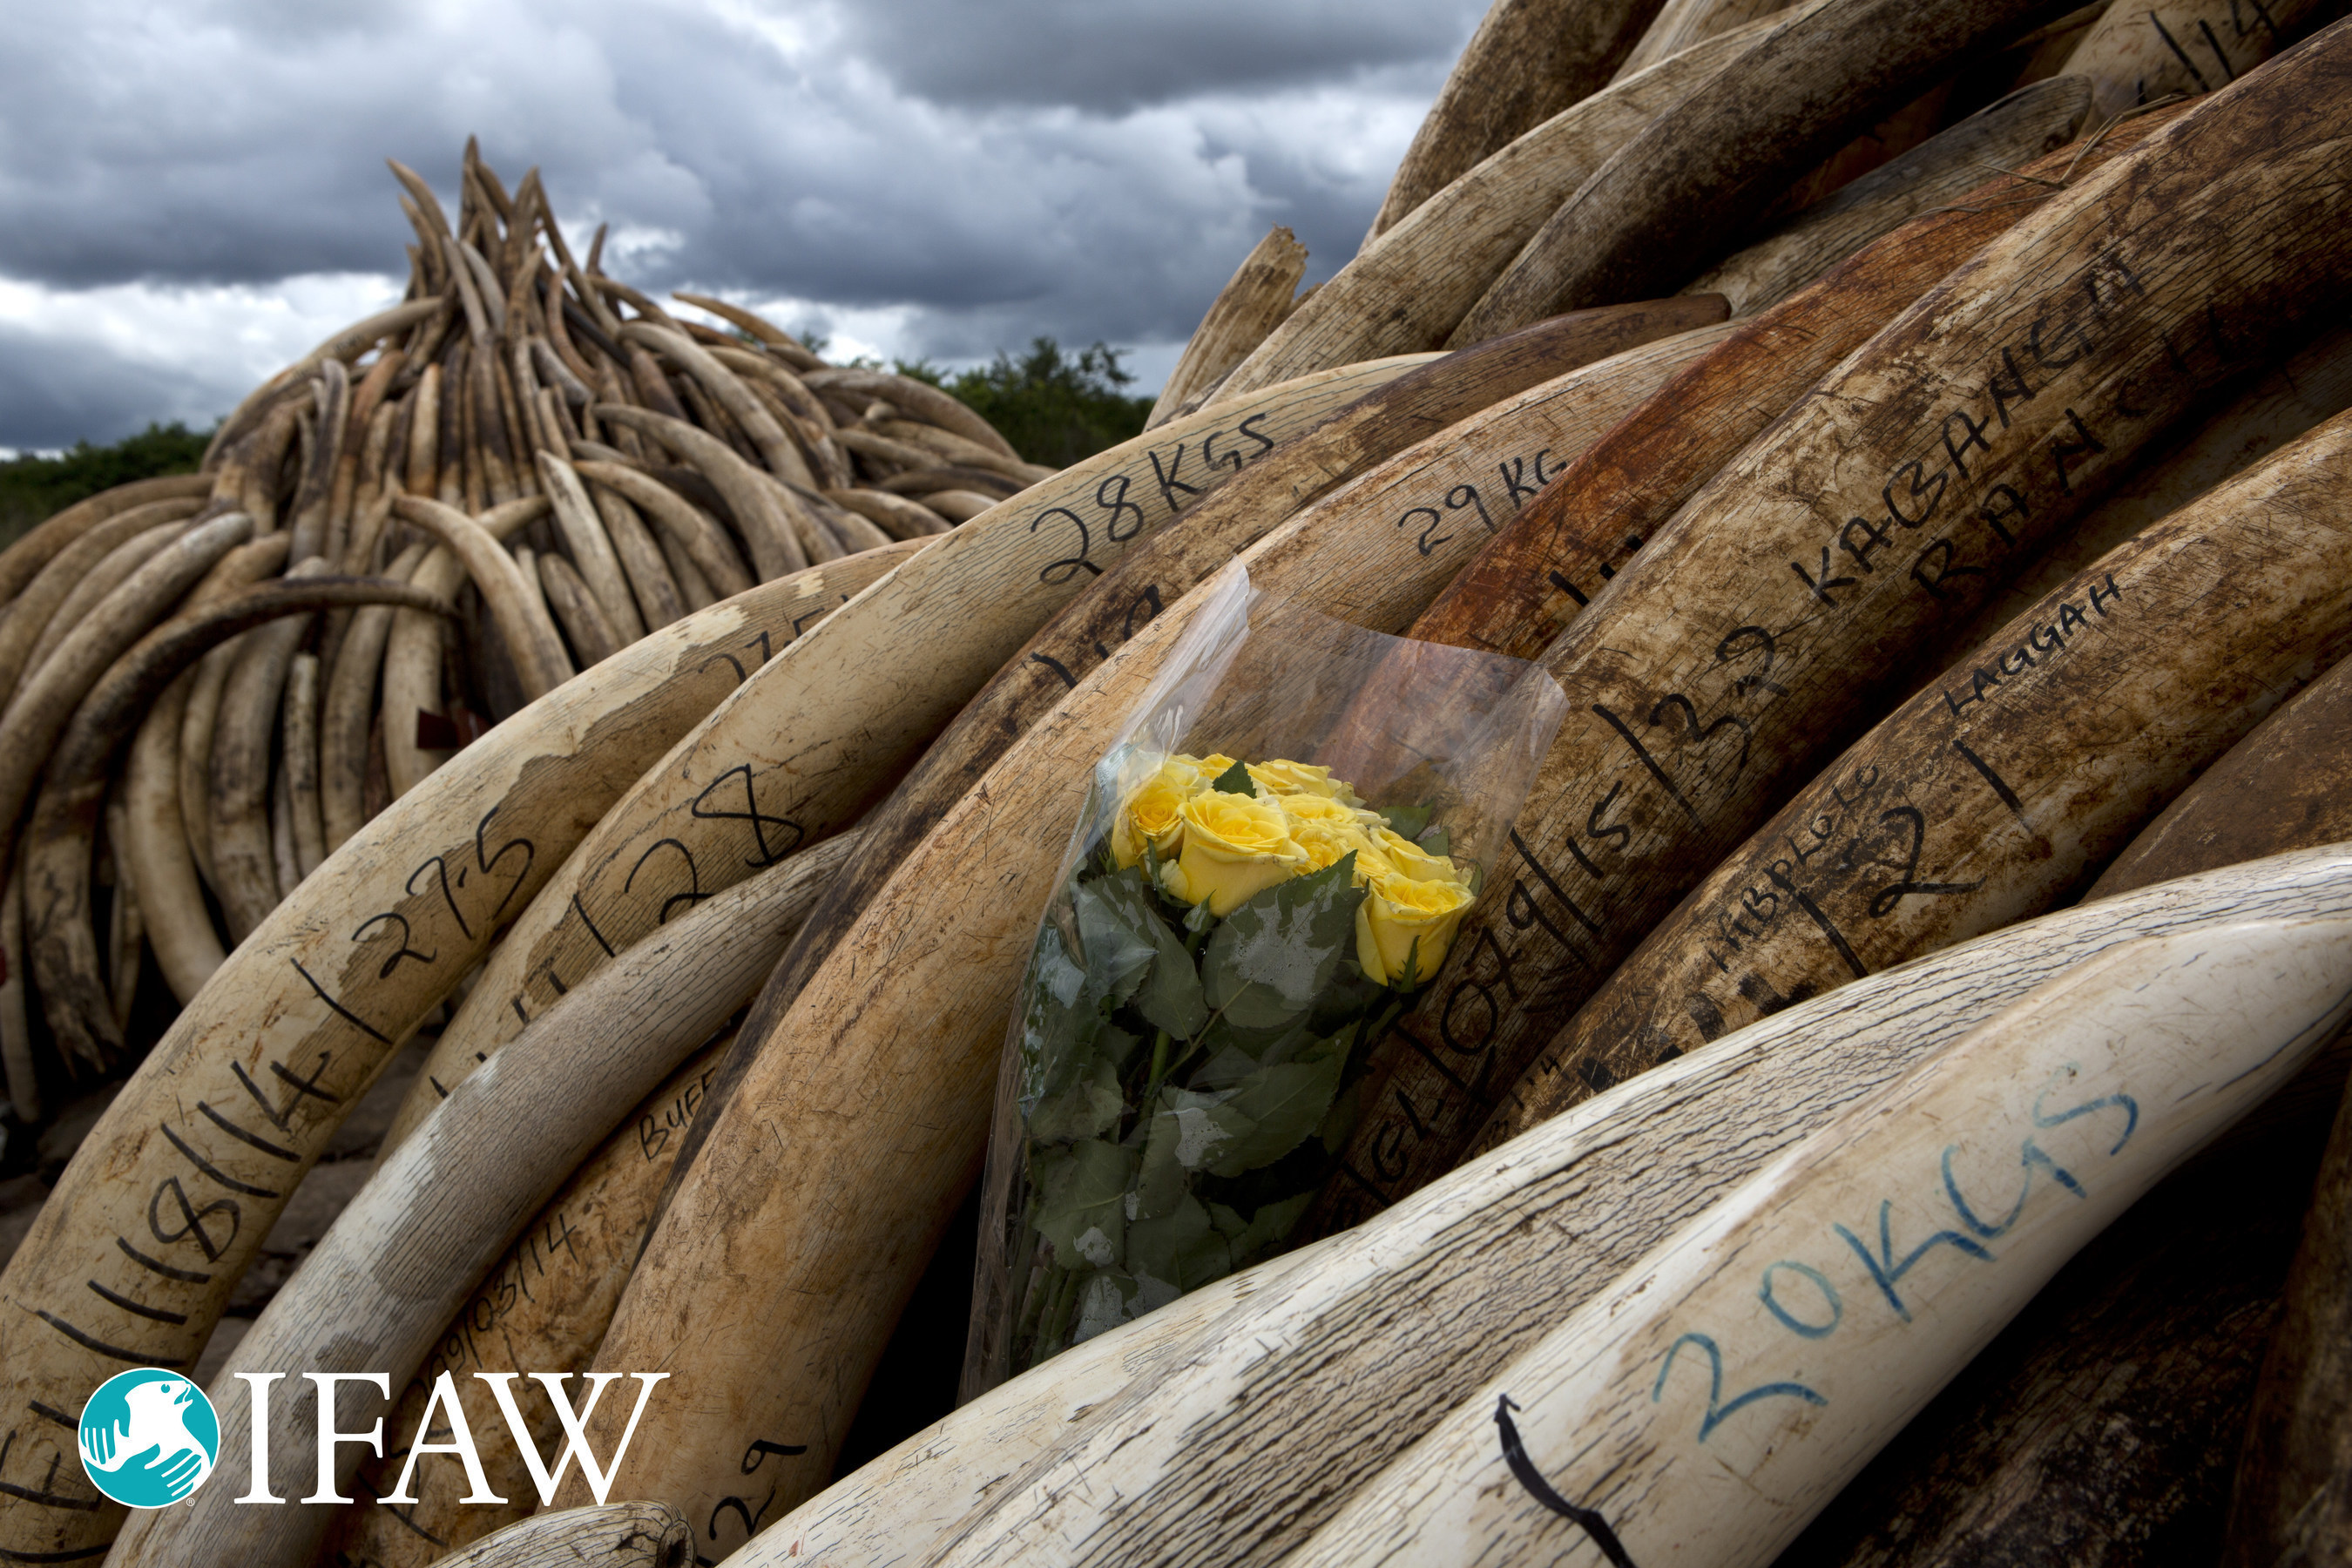 IFAW: Largest ivory crush ever in Kenya sends message to poachers